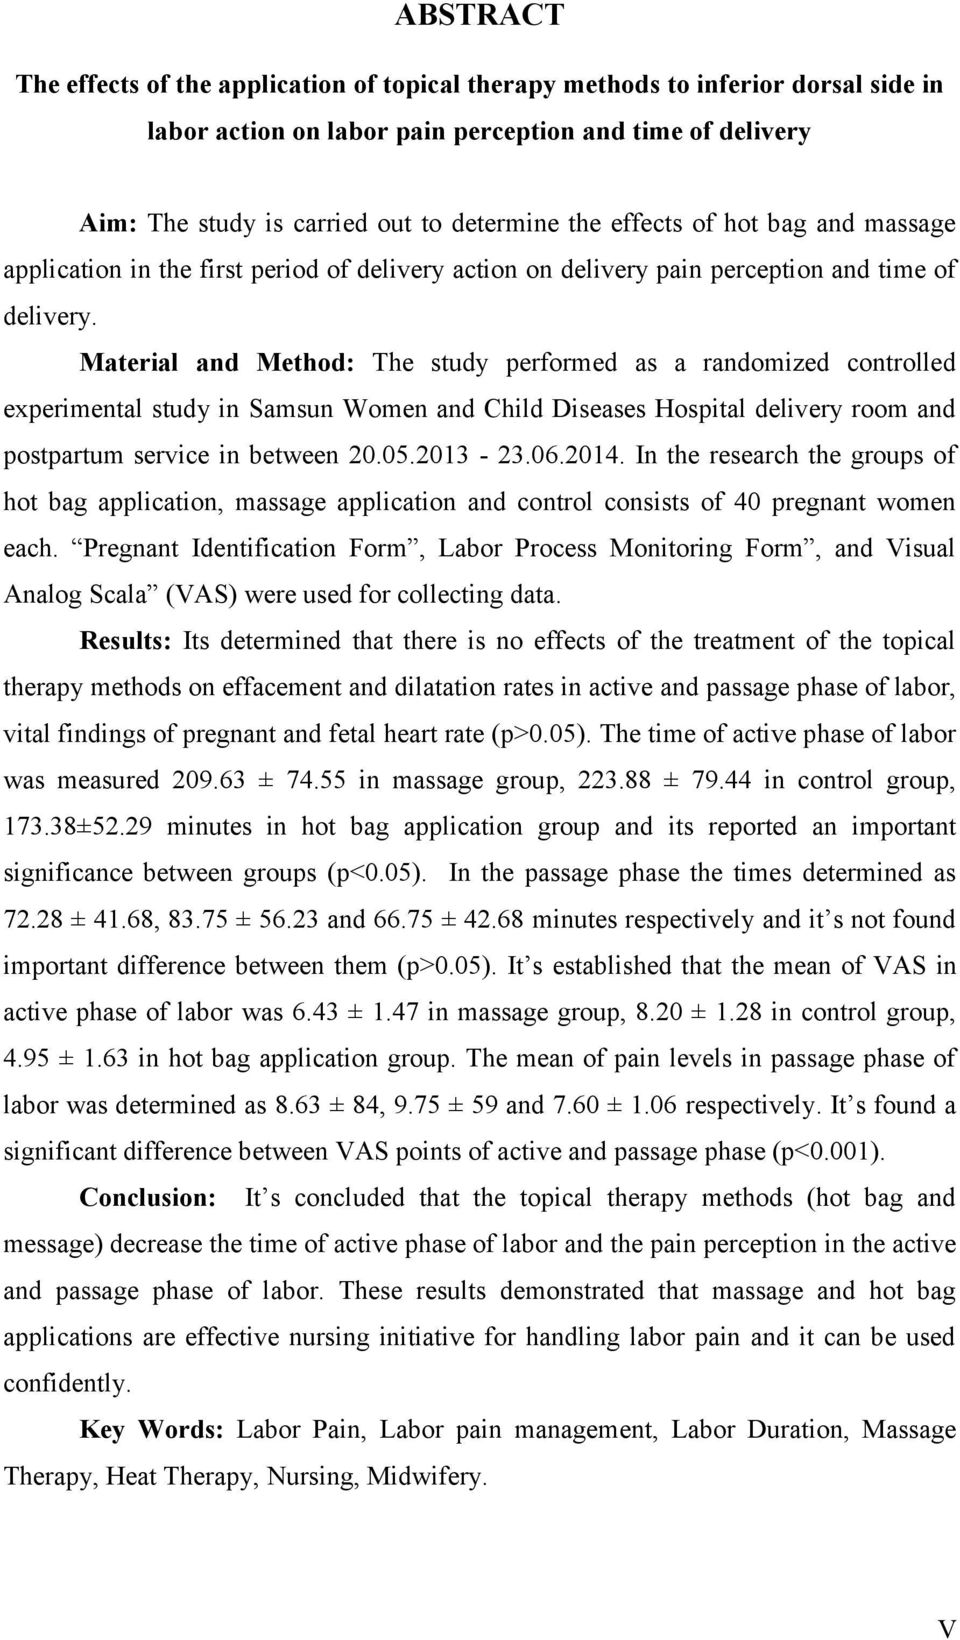 Material and Method: The study performed as a randomized controlled experimental study in Samsun Women and Child Diseases Hospital delivery room and postpartum service in between 20.05.2013-23.06.